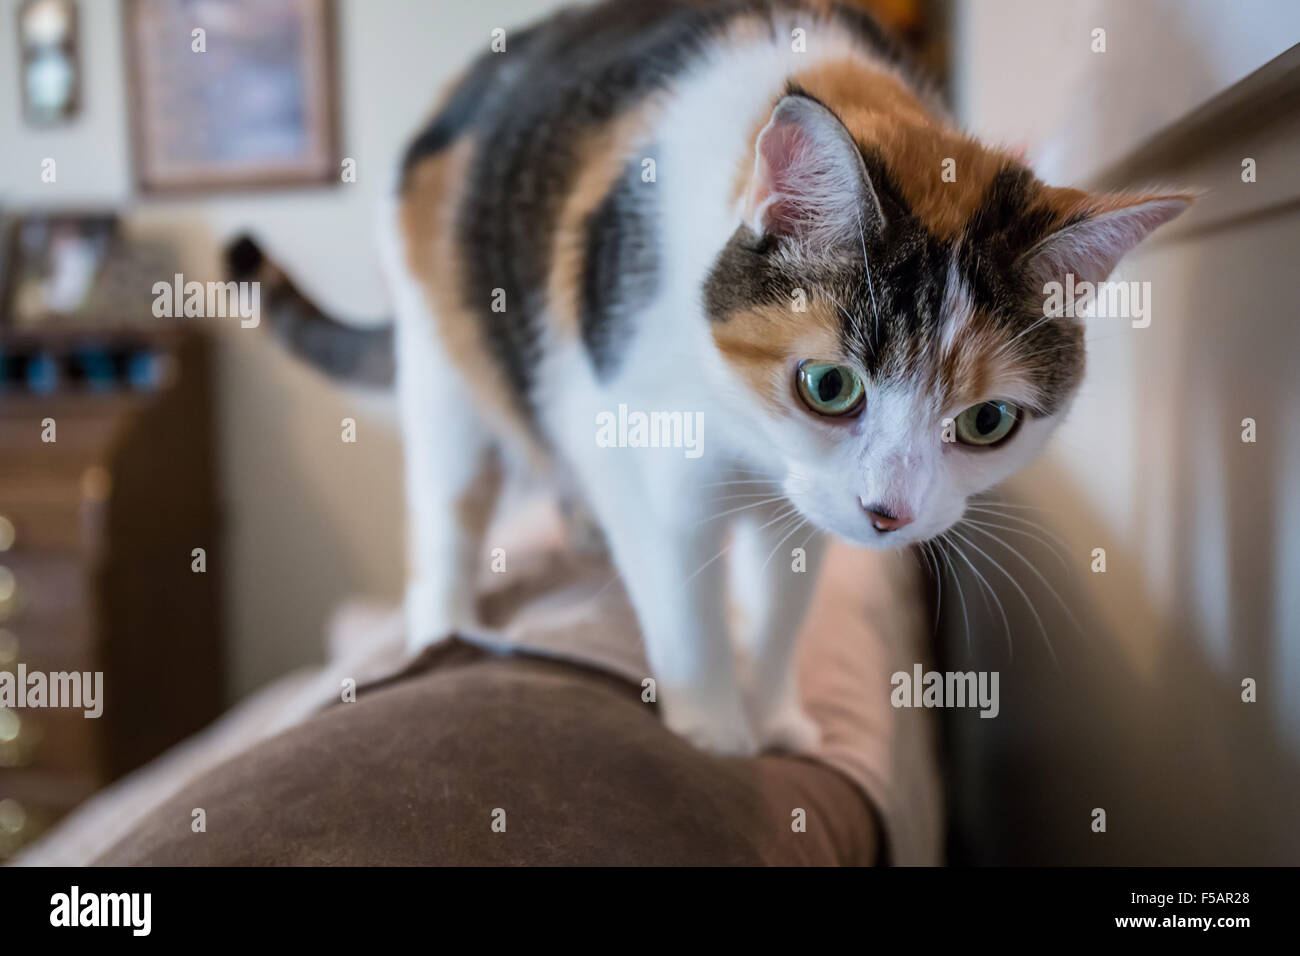 Molly, a calico cat, climbing on the back of a sofa, getting ready to jump down Stock Photo